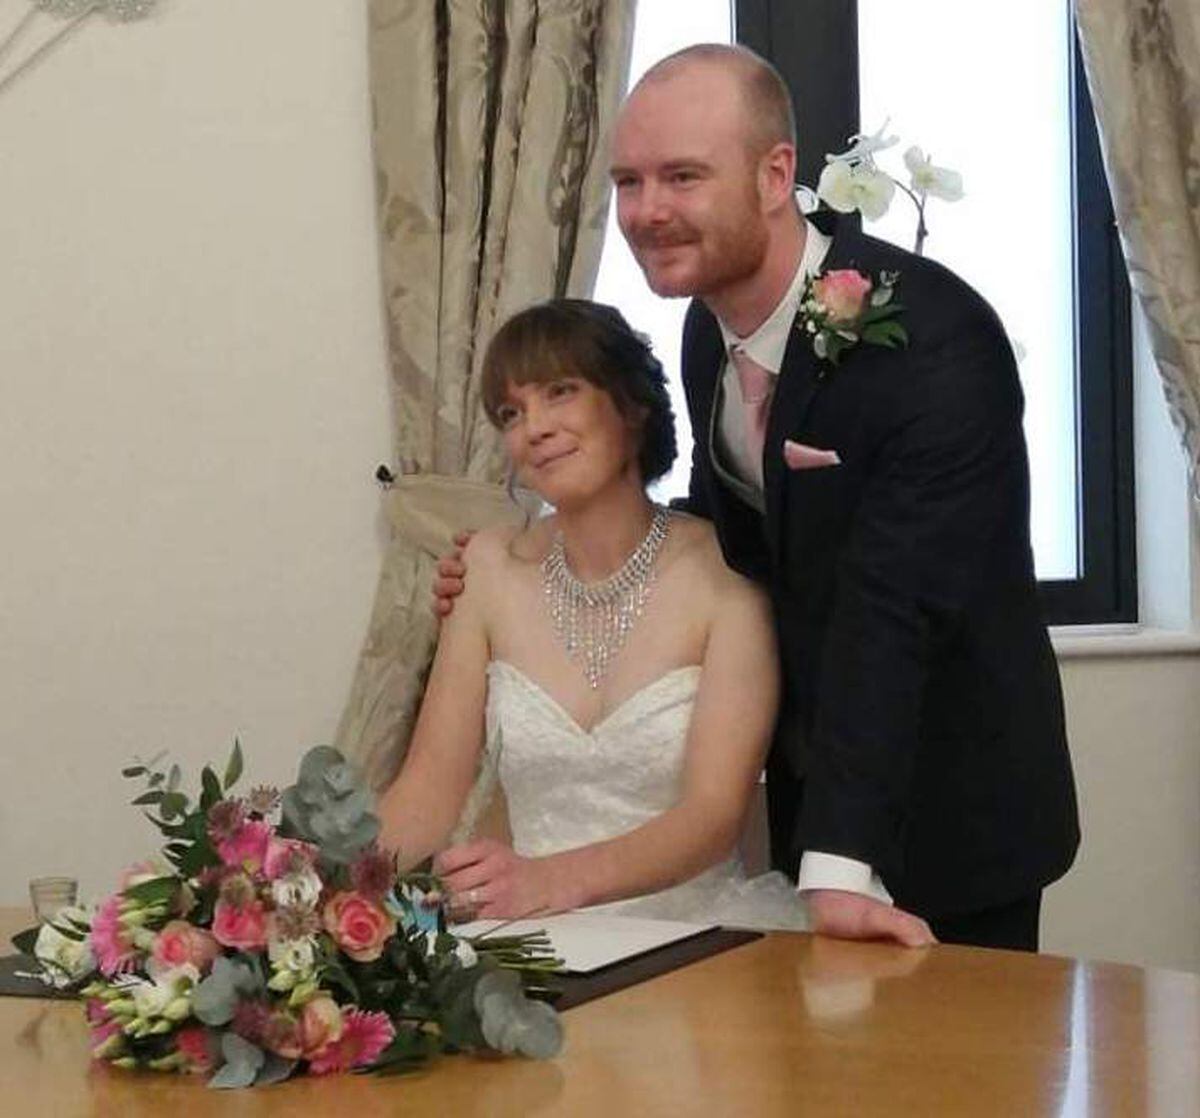 Georgina Clarke and Nicholas Derry after tying the knot